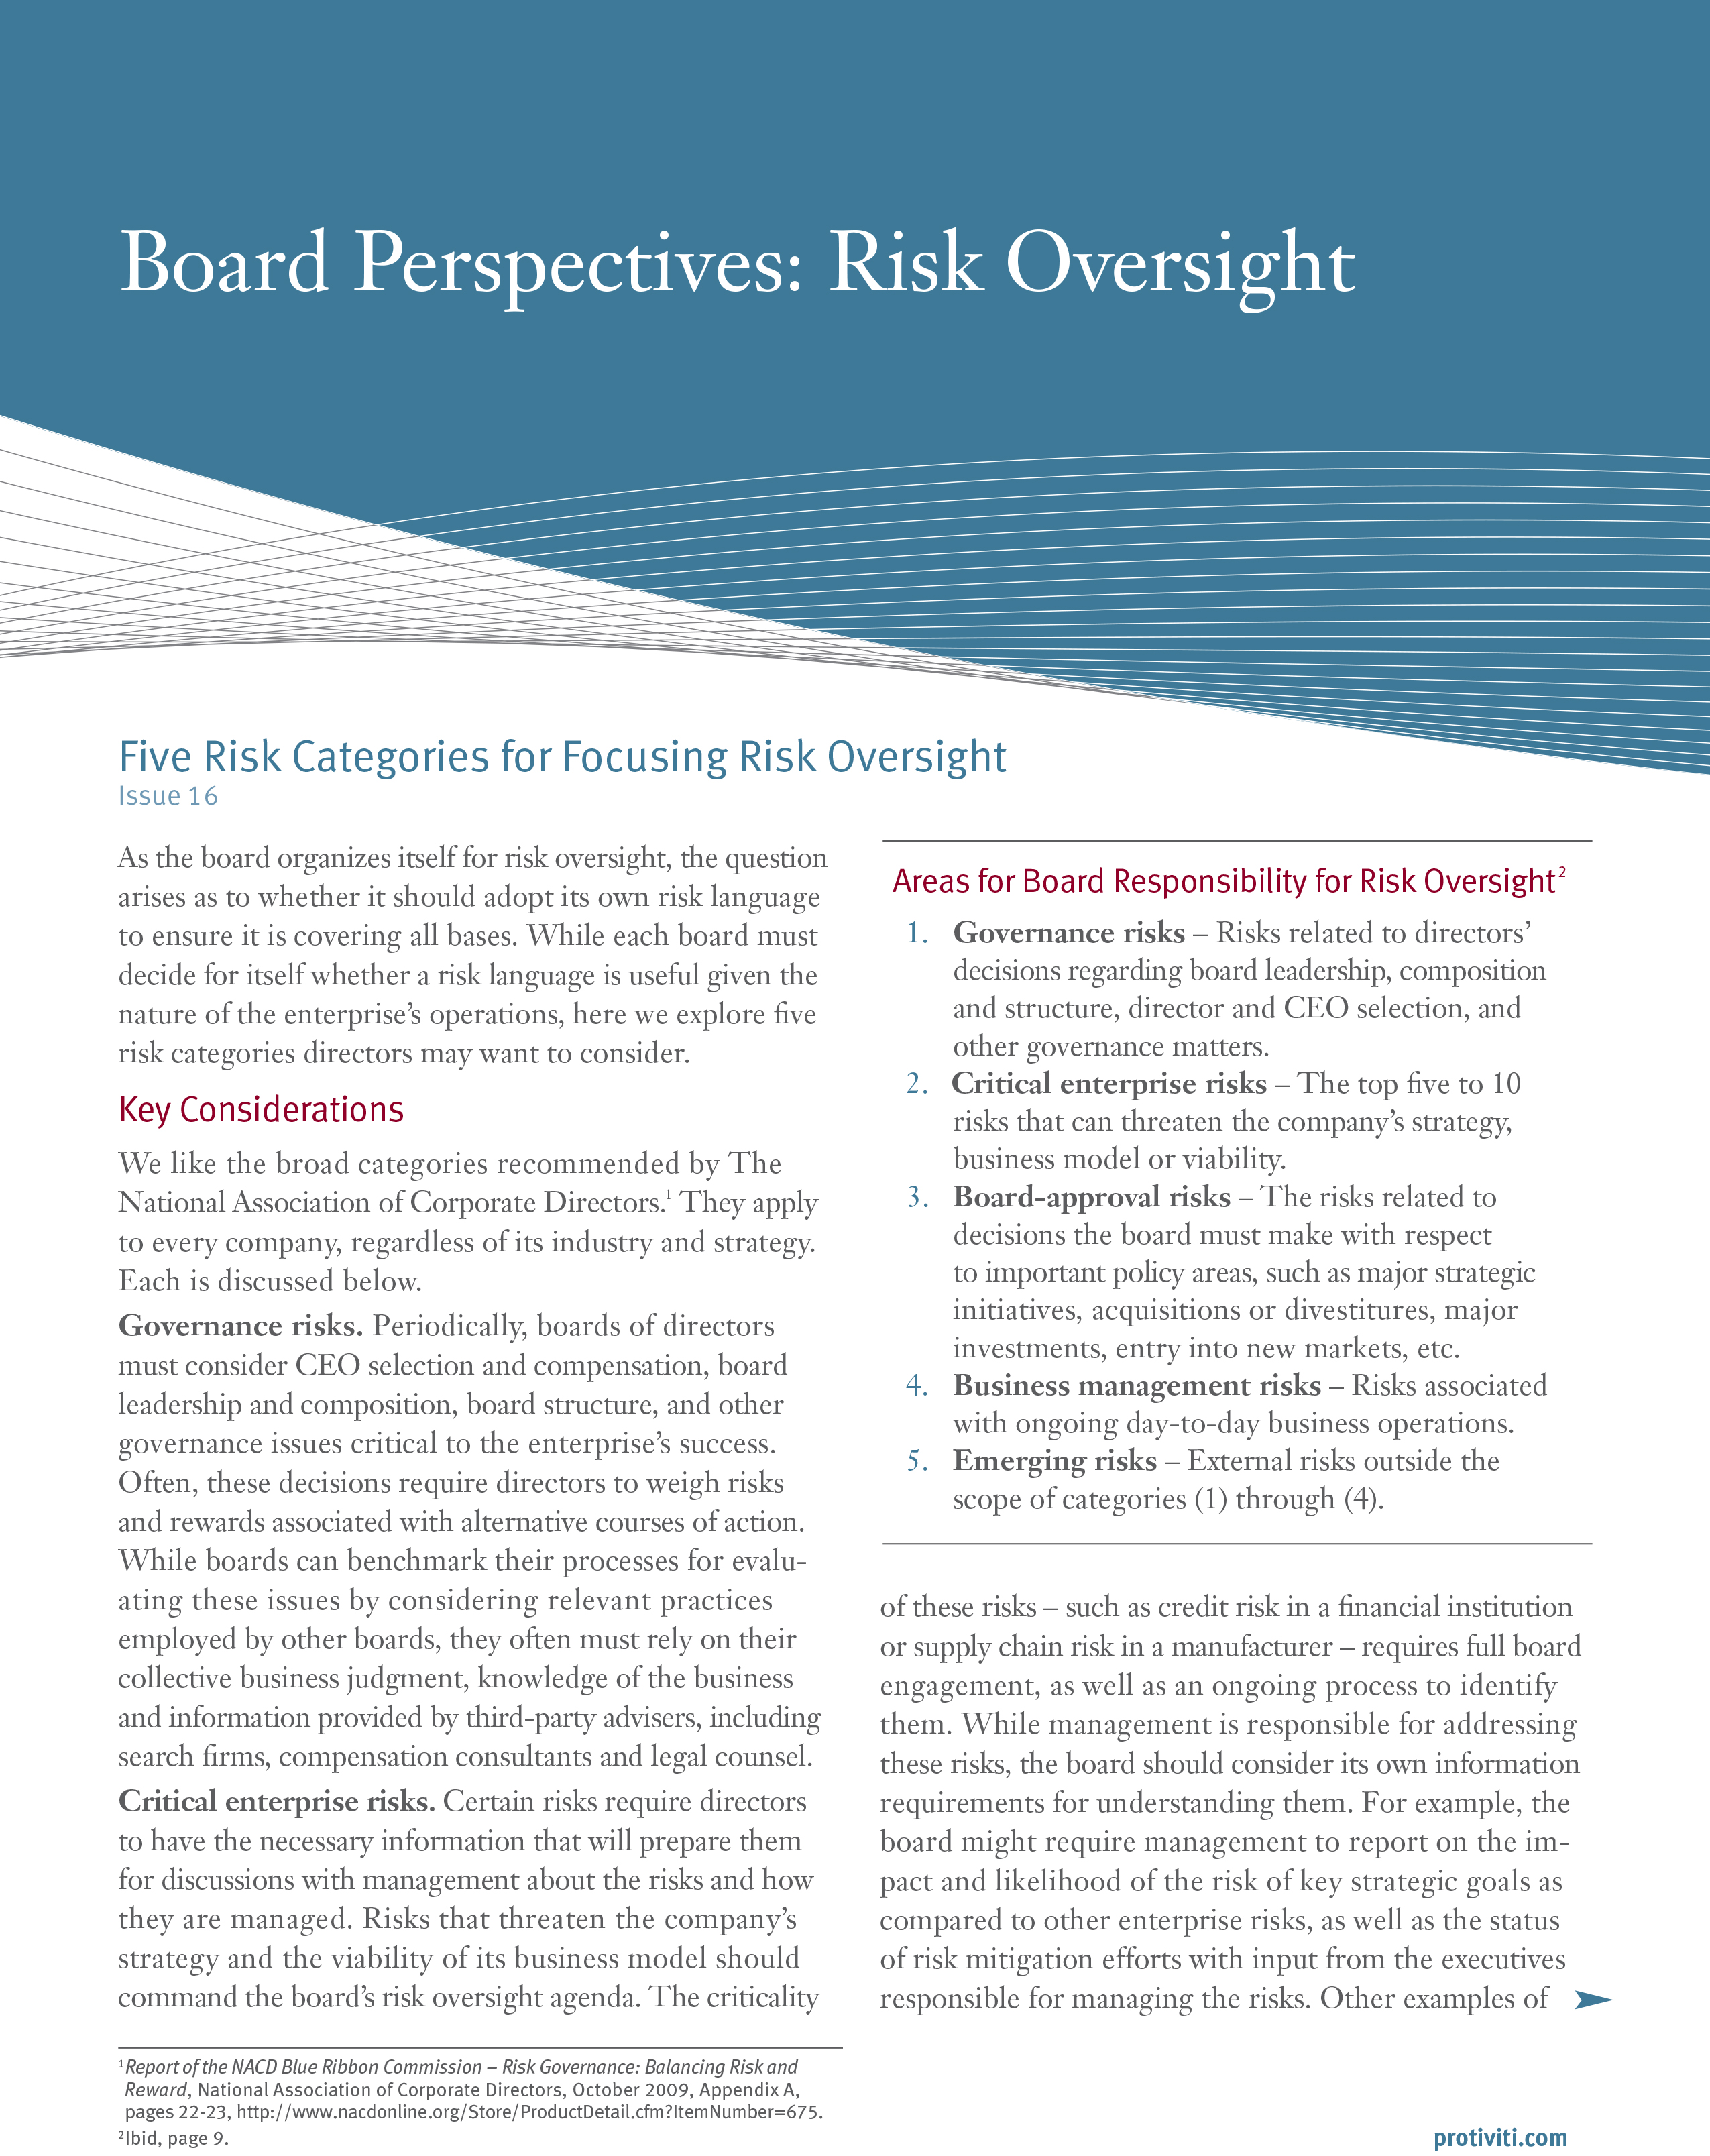 Screenshot of the first page of Five Risk Categories for Focusing Risk Oversight